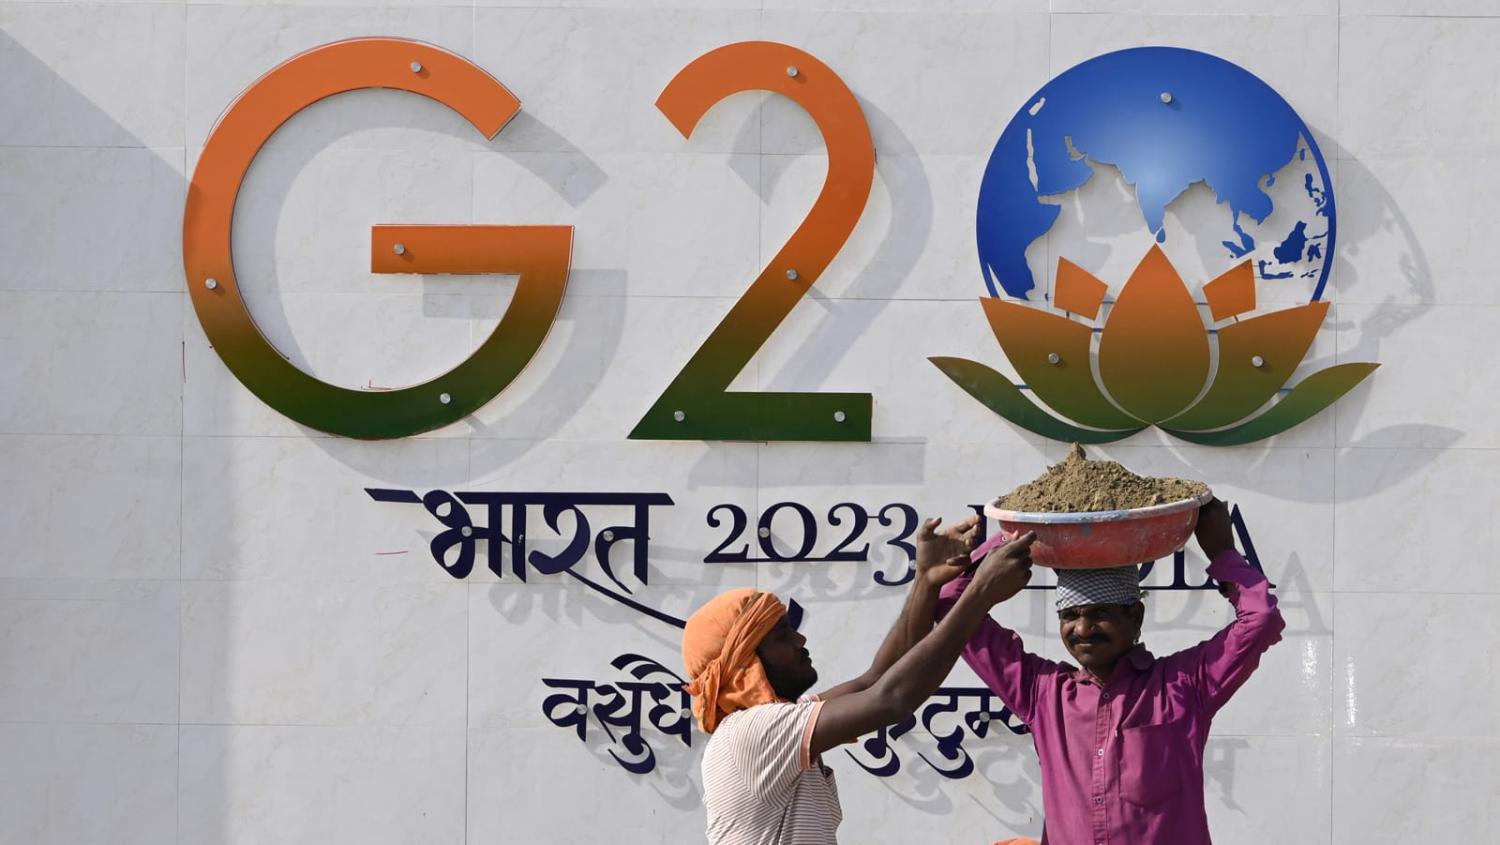 India’s G20 presidency undoubtedly comes at a pivotal moment, when the forces that shape and rule the world are in flux, with the geopolitical context in upheaval (Deepak Gupta/Hindustan Times via Getty Images)